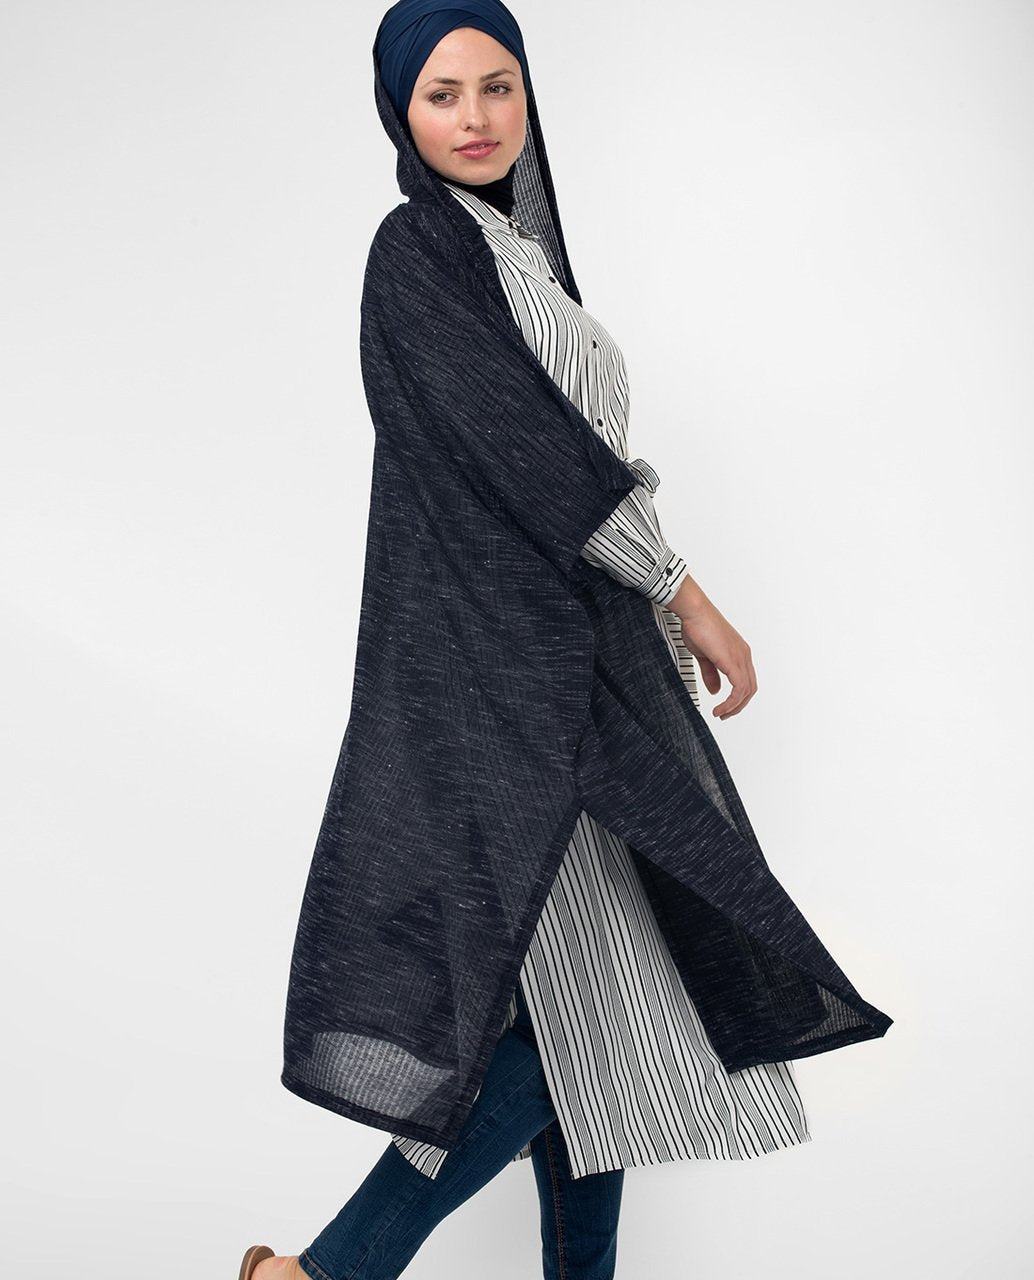 Relaxed Hooded Outerwear Kimono in Grey Print Color - ModestPath.com